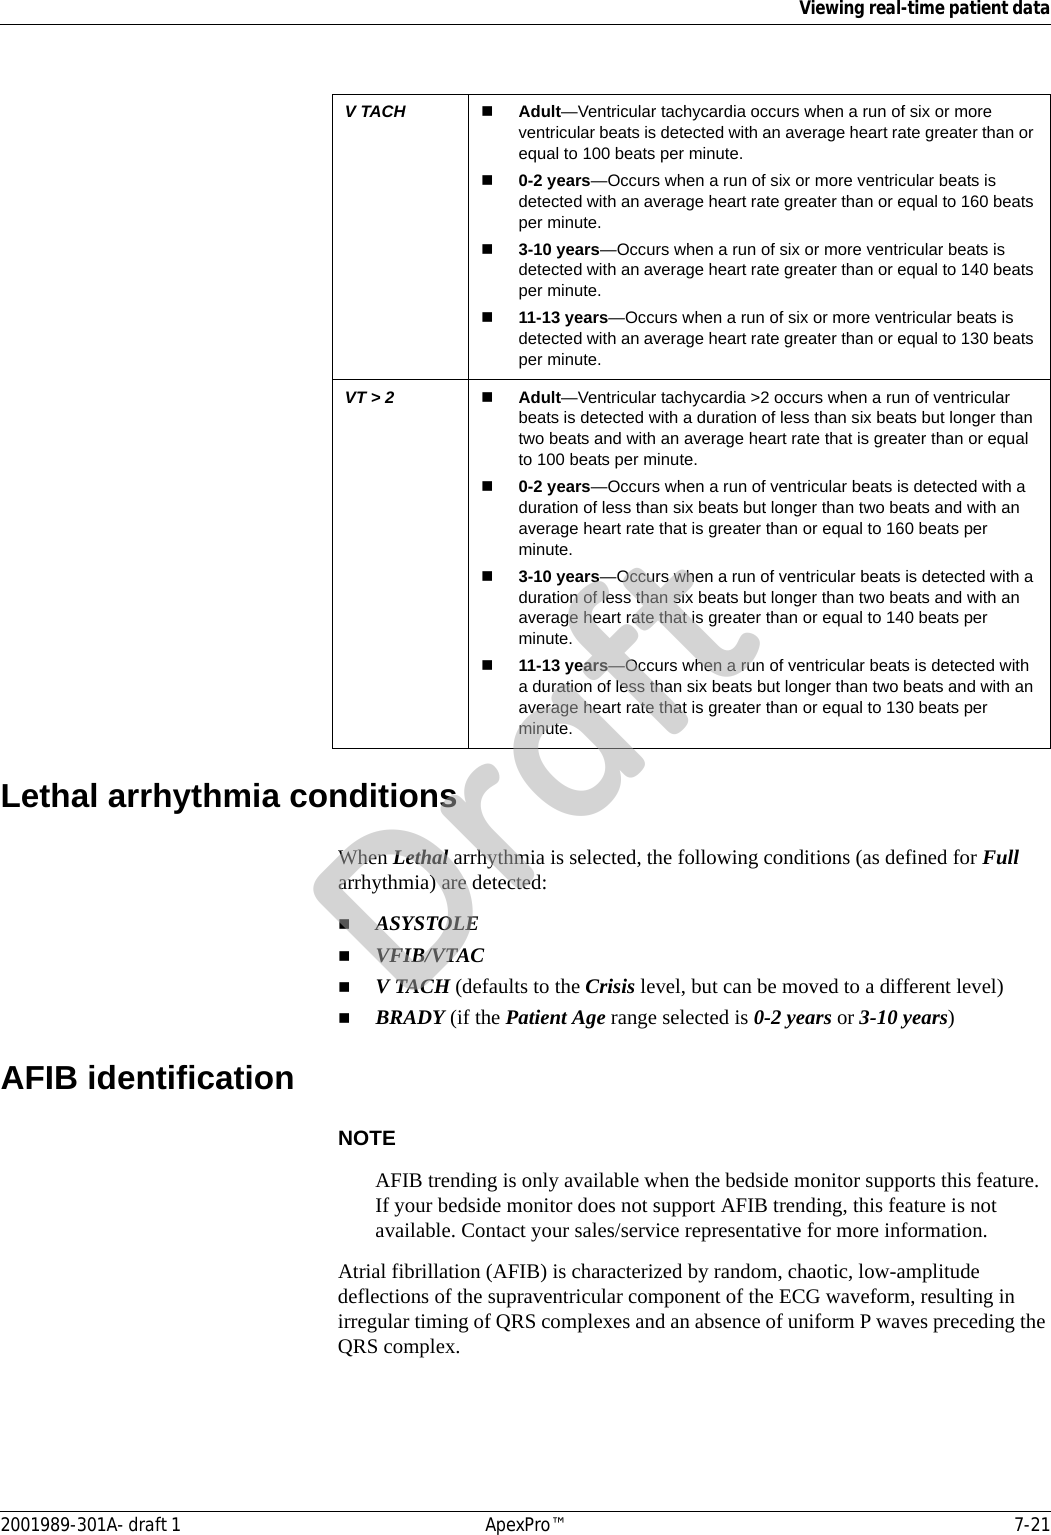 Viewing real-time patient data2001989-301A- draft 1 ApexPro™ 7-21Lethal arrhythmia conditionsWhen Lethal arrhythmia is selected, the following conditions (as defined for Full arrhythmia) are detected:ASYSTOLEVFIB/VTACV TACH (defaults to the Crisis level, but can be moved to a different level)BRADY (if the Patient Age range selected is 0-2 years or 3-10 years)AFIB identificationNOTEAFIB trending is only available when the bedside monitor supports this feature. If your bedside monitor does not support AFIB trending, this feature is not available. Contact your sales/service representative for more information.Atrial fibrillation (AFIB) is characterized by random, chaotic, low-amplitude deflections of the supraventricular component of the ECG waveform, resulting in irregular timing of QRS complexes and an absence of uniform P waves preceding the QRS complex. V TACH Adult—Ventricular tachycardia occurs when a run of six or more ventricular beats is detected with an average heart rate greater than or equal to 100 beats per minute.0-2 years—Occurs when a run of six or more ventricular beats is detected with an average heart rate greater than or equal to 160 beats per minute.3-10 years—Occurs when a run of six or more ventricular beats is detected with an average heart rate greater than or equal to 140 beats per minute.11-13 years—Occurs when a run of six or more ventricular beats is detected with an average heart rate greater than or equal to 130 beats per minute.VT &gt; 2 Adult—Ventricular tachycardia &gt;2 occurs when a run of ventricular beats is detected with a duration of less than six beats but longer than two beats and with an average heart rate that is greater than or equal to 100 beats per minute.0-2 years—Occurs when a run of ventricular beats is detected with a duration of less than six beats but longer than two beats and with an average heart rate that is greater than or equal to 160 beats per minute.3-10 years—Occurs when a run of ventricular beats is detected with a duration of less than six beats but longer than two beats and with an average heart rate that is greater than or equal to 140 beats per minute.11-13 years—Occurs when a run of ventricular beats is detected with a duration of less than six beats but longer than two beats and with an average heart rate that is greater than or equal to 130 beats per minute.Draft